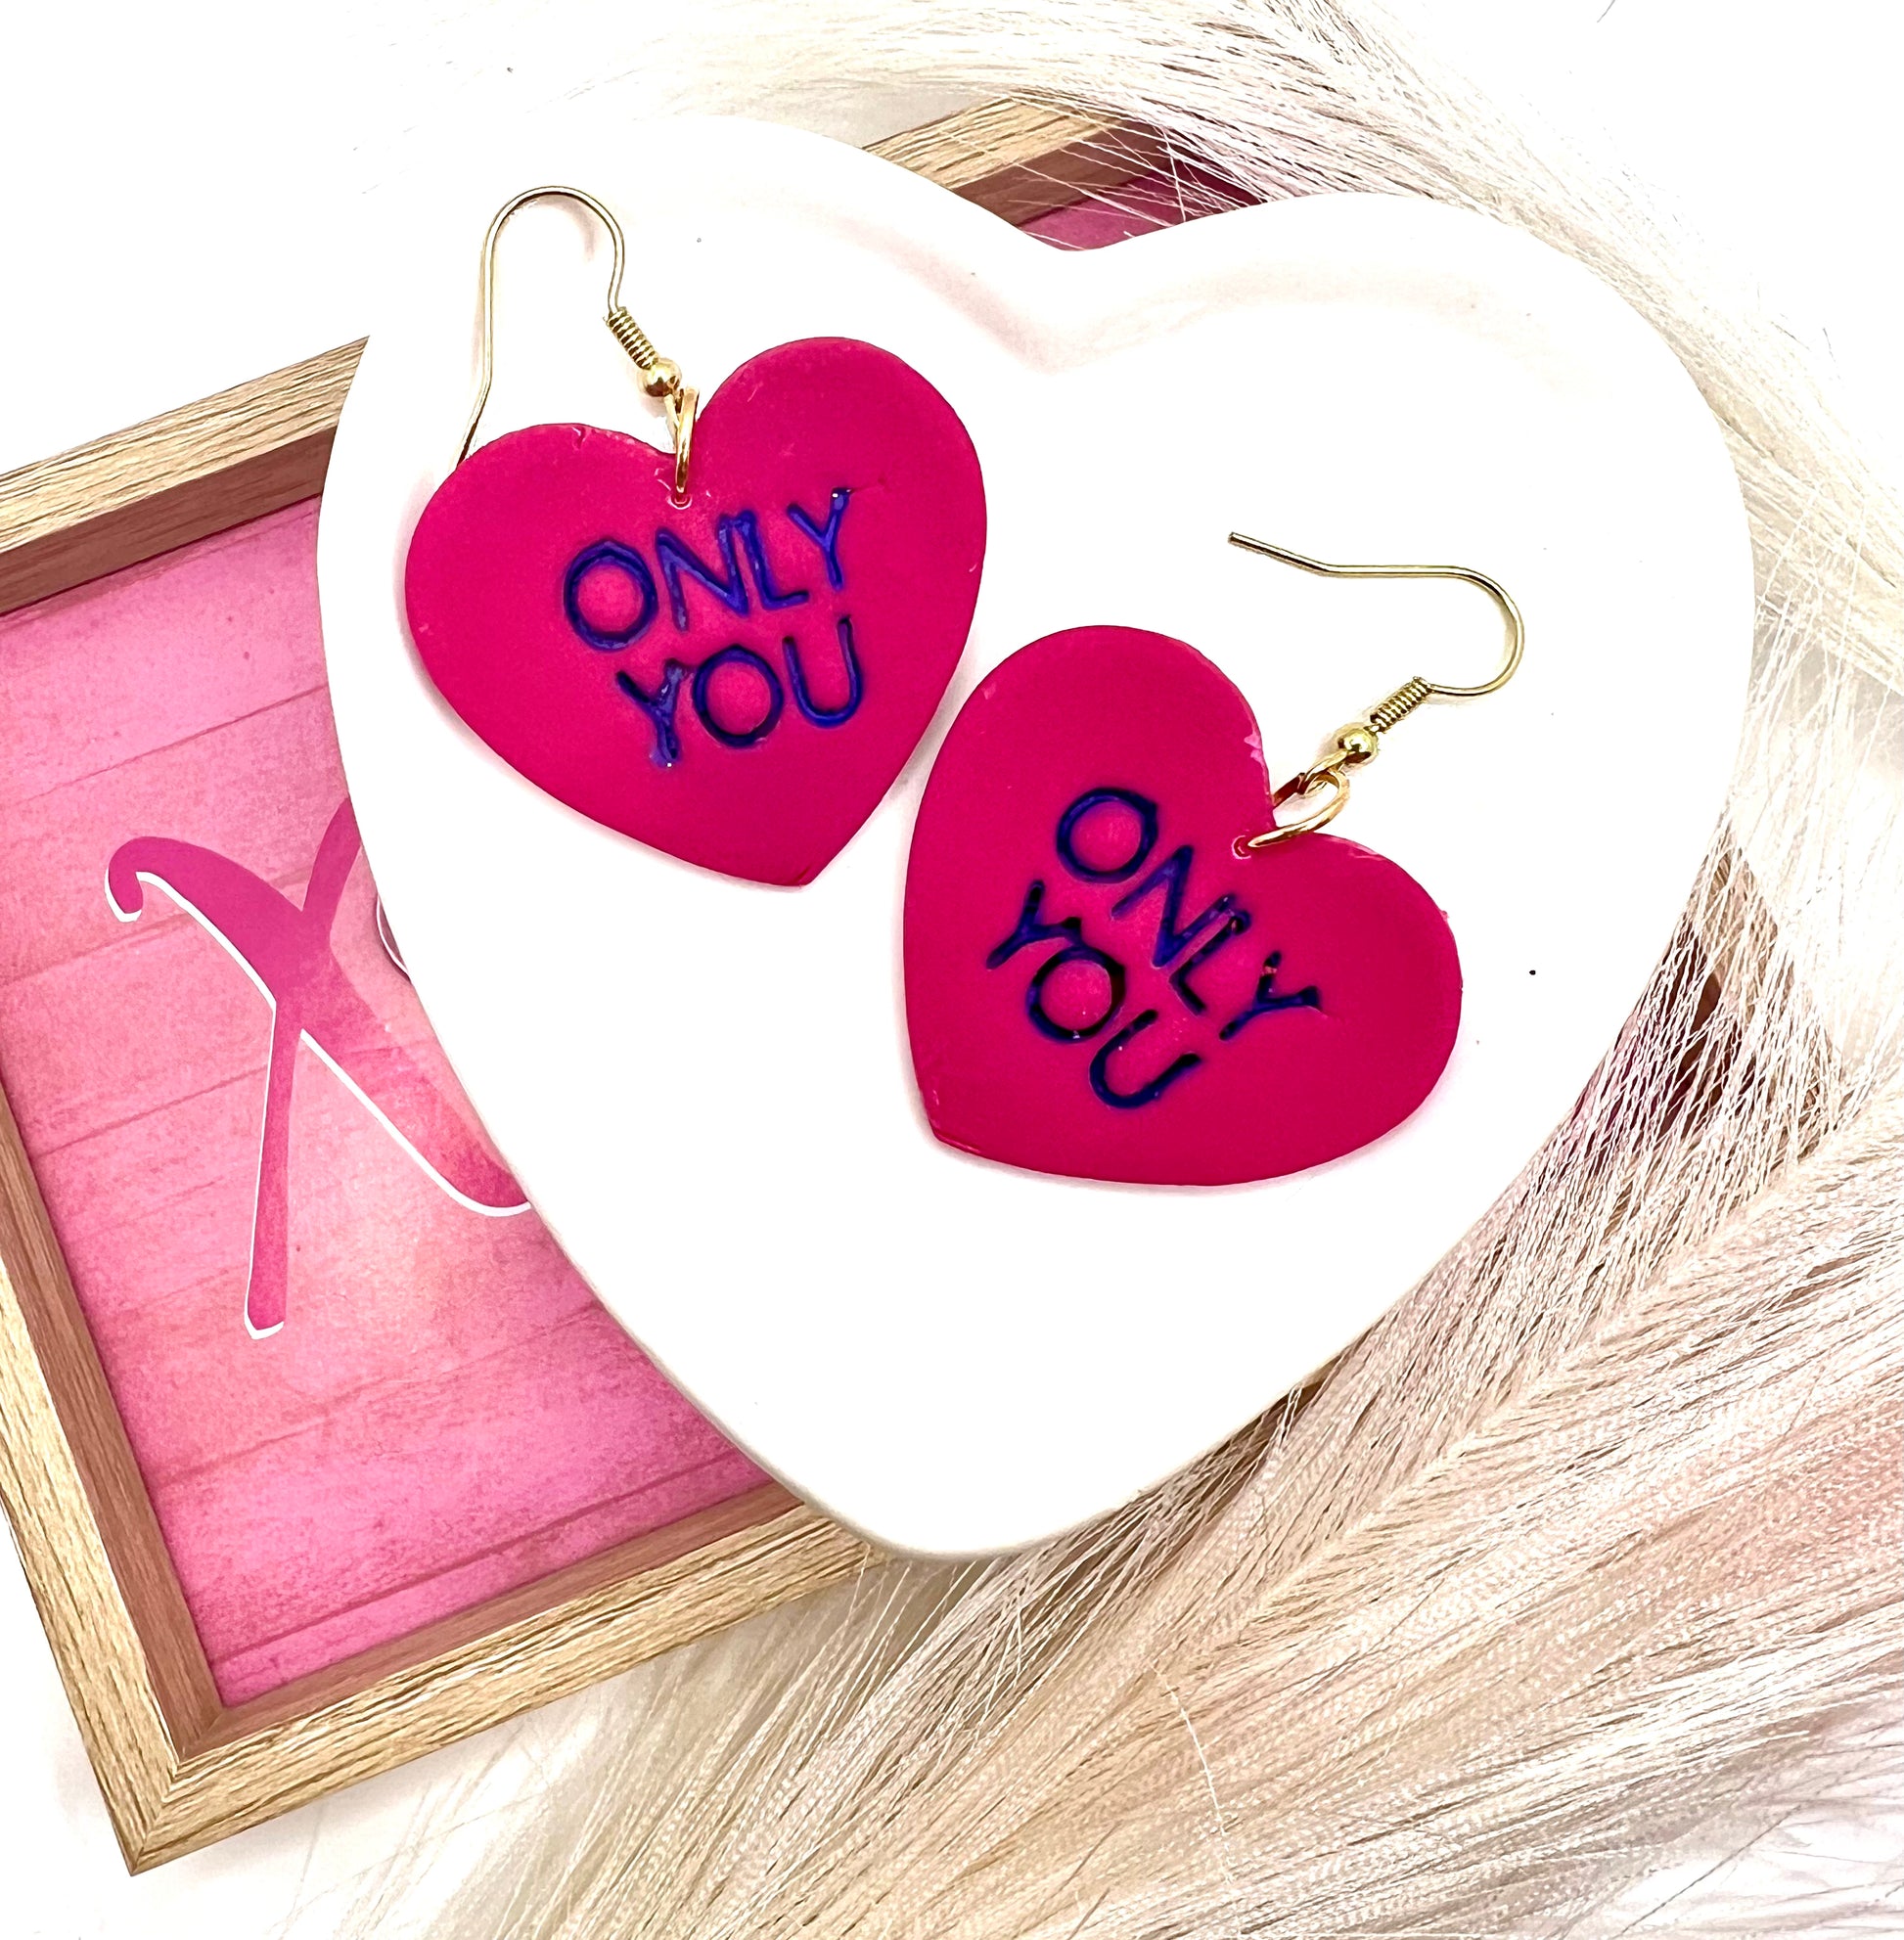 heart shaped earrings with only you stamped in purple.  they are on gold fish hook style earrings.